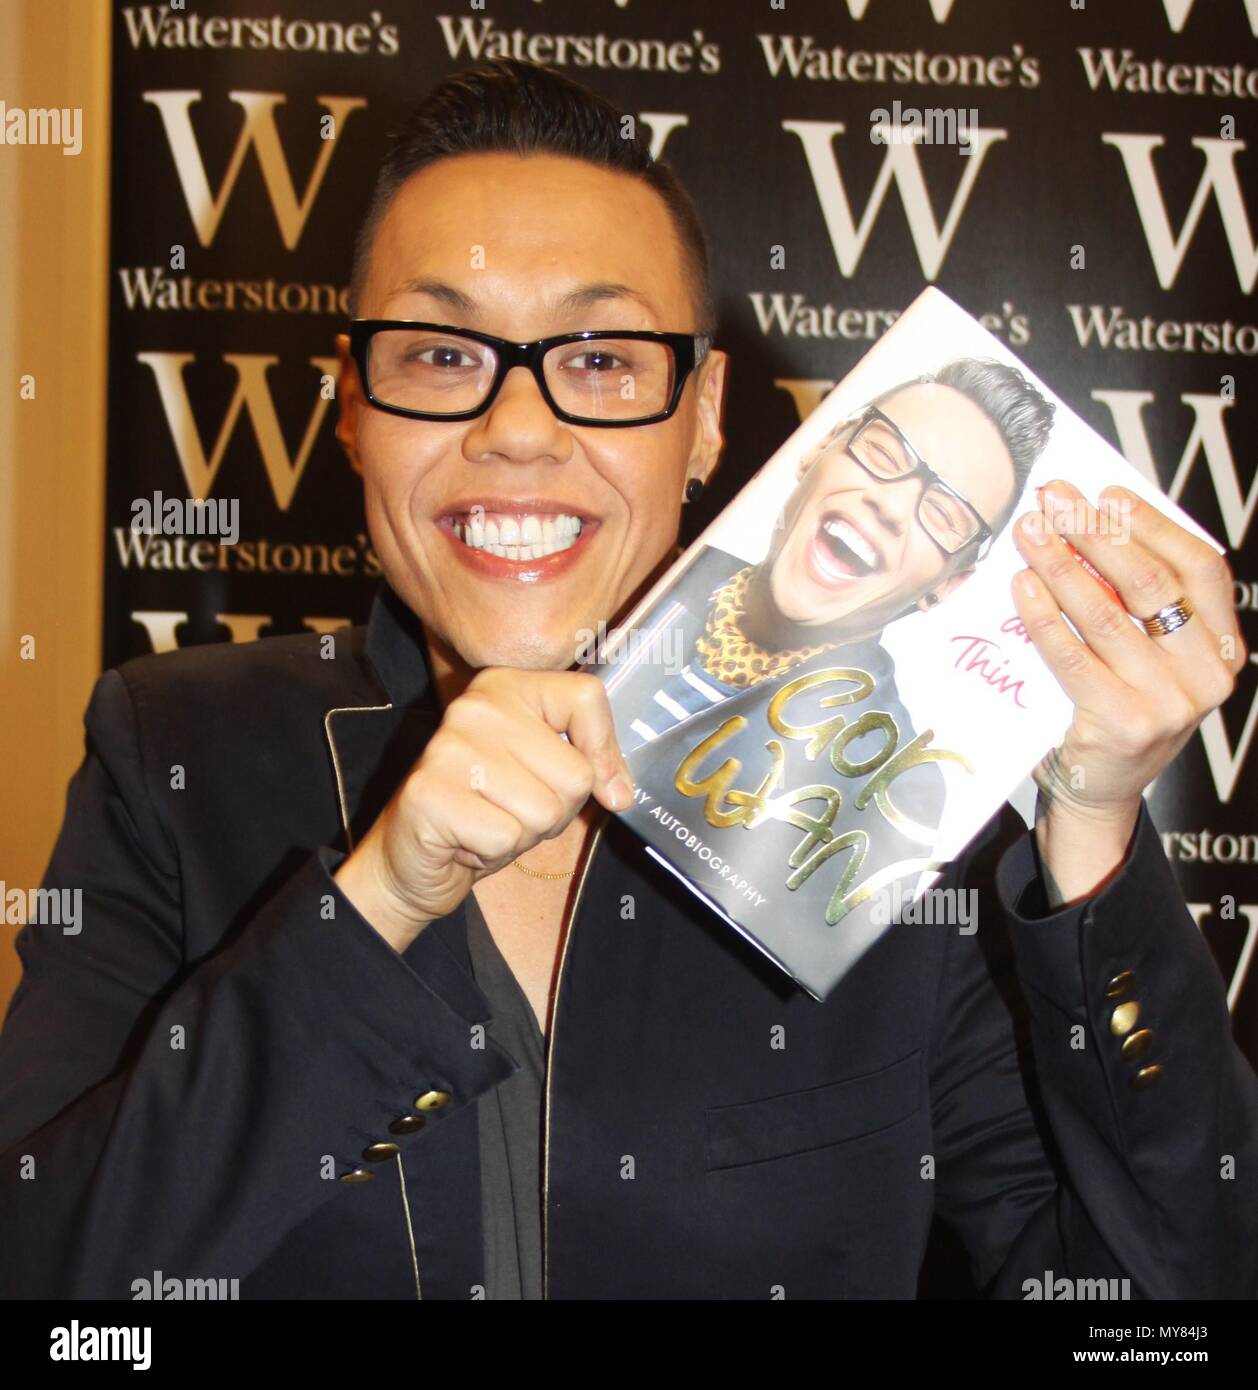 Liverpool,Uk, Gok Wan signs copies of his autobiography in waterstones liverpool one, credit Ian Fairbrother/Alamy Stock Photos Stock Photo